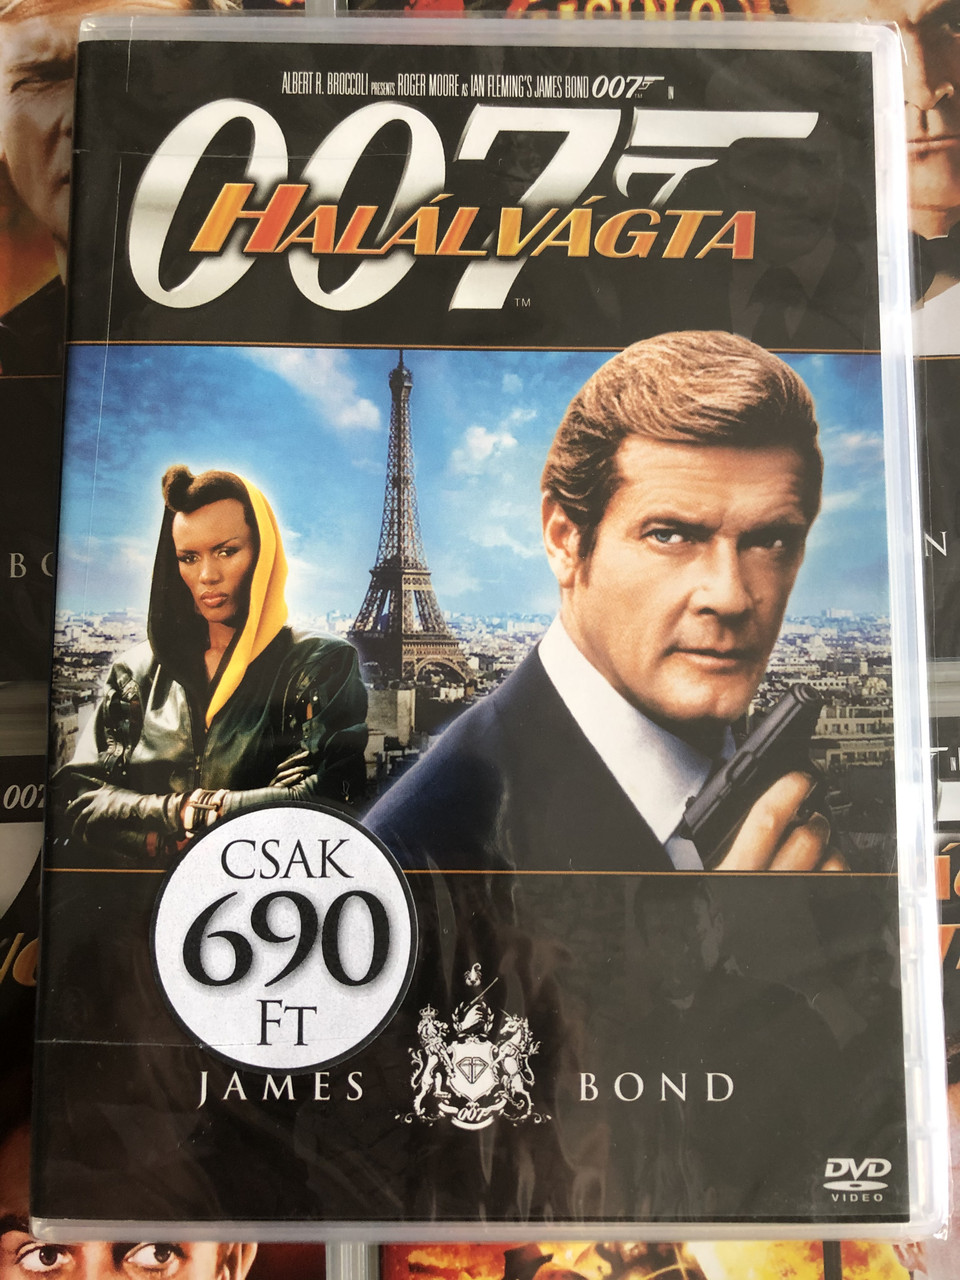 James Bond Sir Roger Moore Poster The Name's Bond BRAND NEW OFFICIAL LICENSE 007 